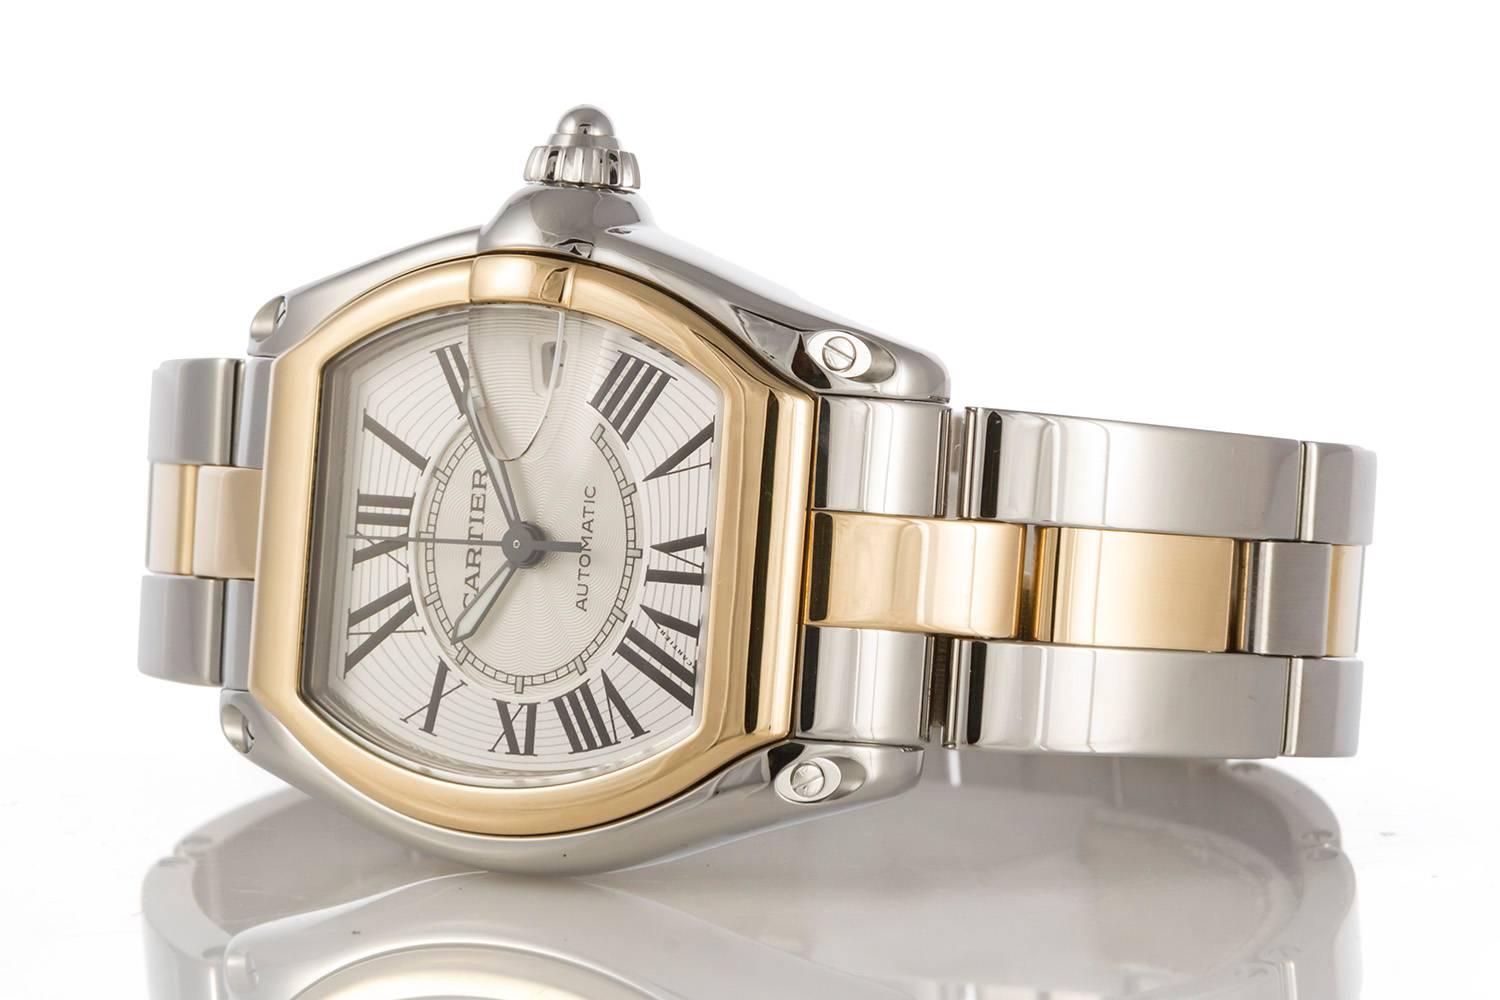 Authentic Cartier 18k Gold & Steel Two Tone Automatic Large Roadster W62031Y4. This watch features a 38mm x 44mm case. The watch comes with an extra Cartier black nylon strap. It is in very good shape with very few signs of wear. This watch has